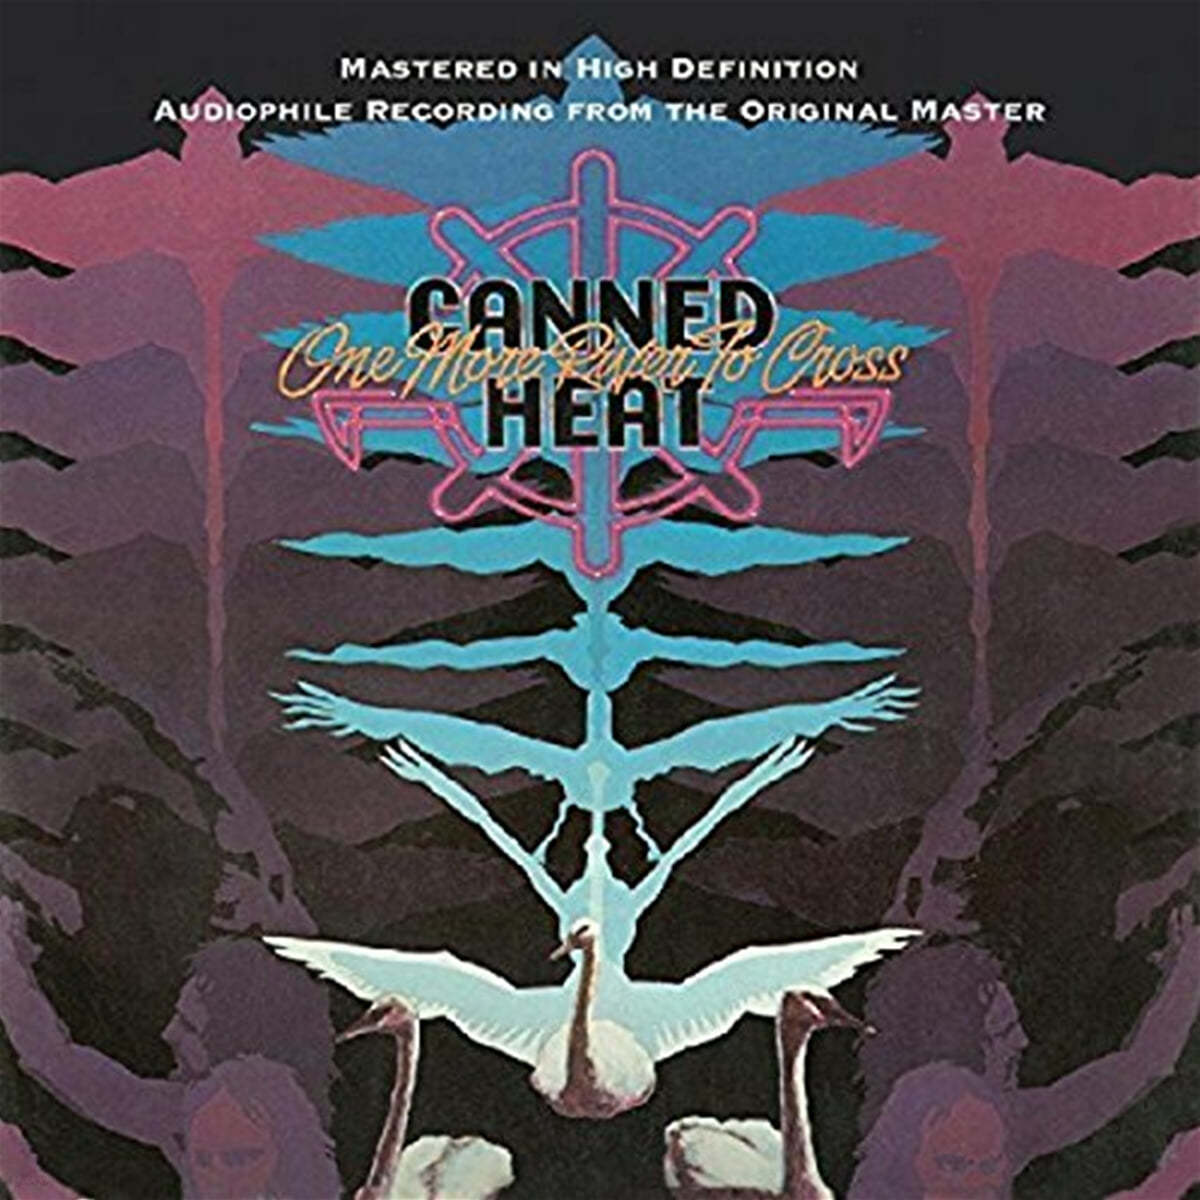 Canned Heat (캔드 히트) - One More River To Cross 